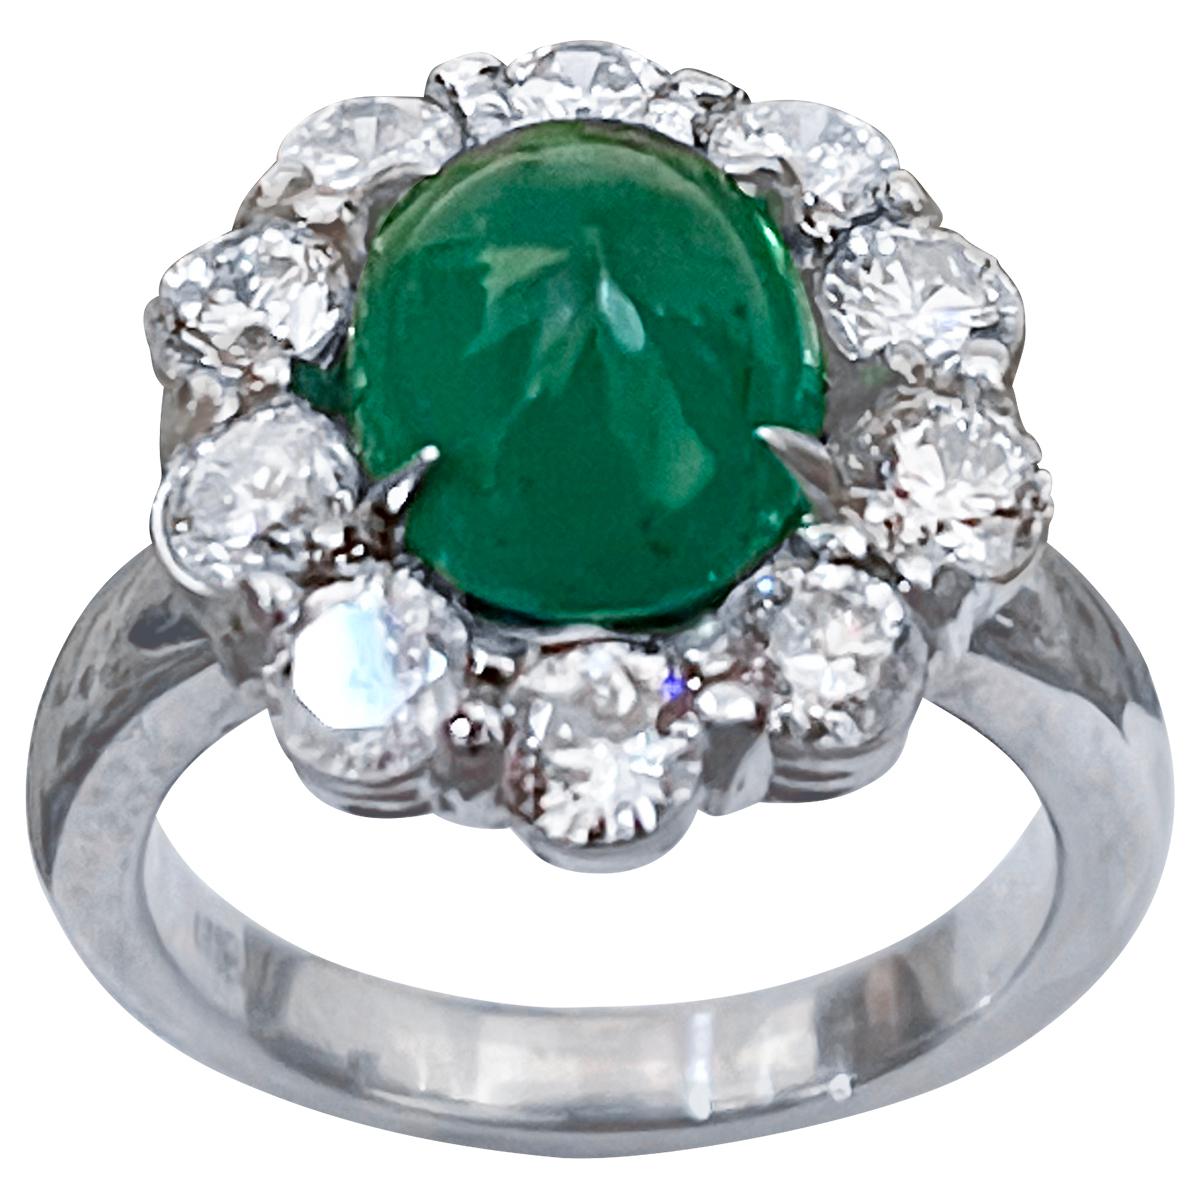 4 Carat Natural Oval Emerald Cabochon & Diamond Ring 18 Karat White  Gold Size 6
A classic, Cocktail ring 
10 X 12 Oval Cut  Emerald Cabochon, 
Origin Zambia
Oval Shape  Emerald Ring 
Very clean and intense green color .
Brilliant cut round diamonds